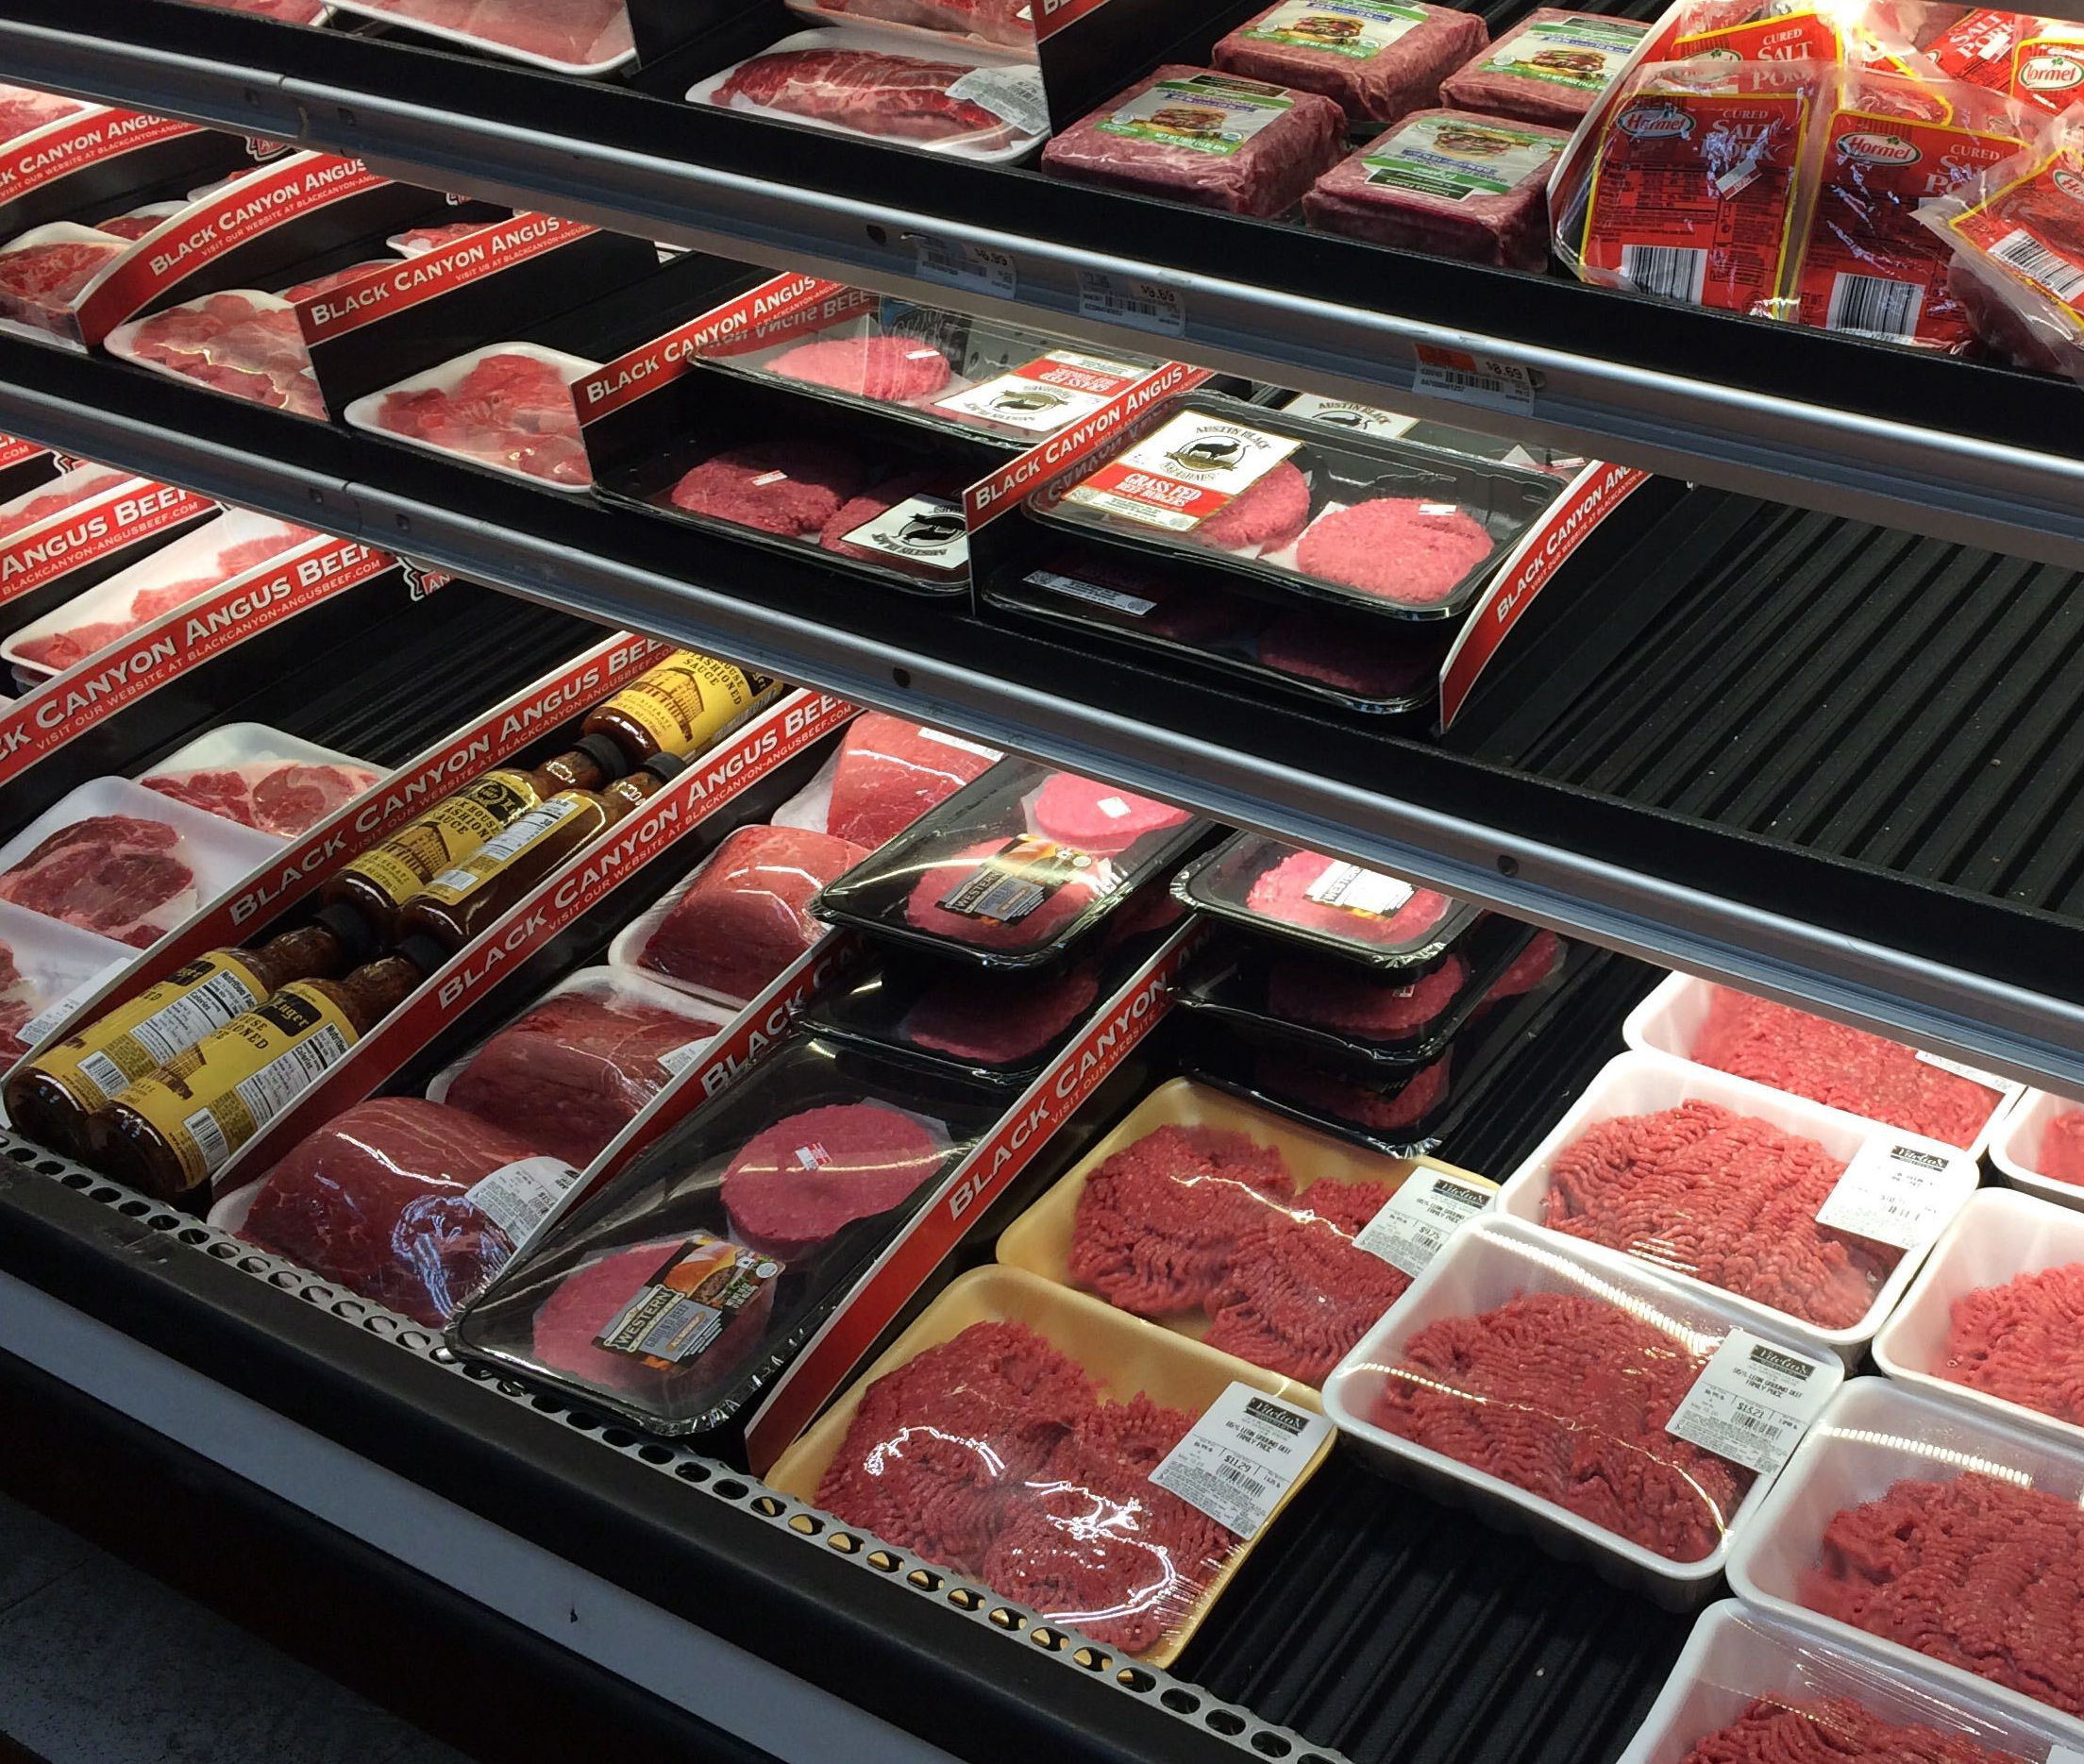 Retail meat sales still highly elevated